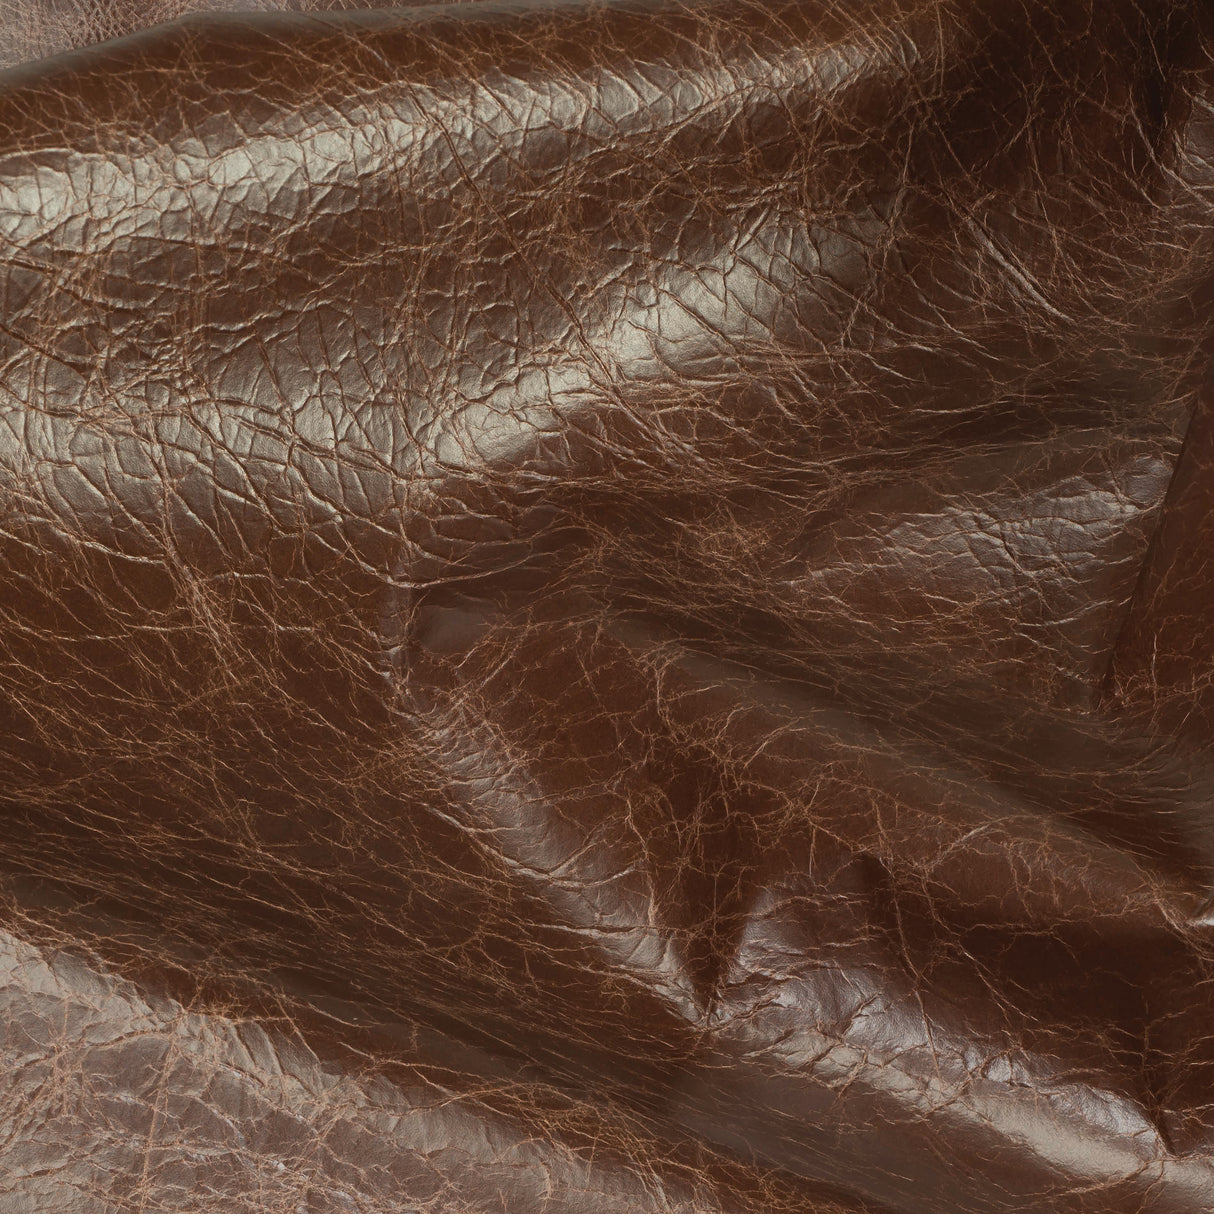 Assorted Upholstery Leather Hides - B+ Grade - 2-3 oz Cowhide